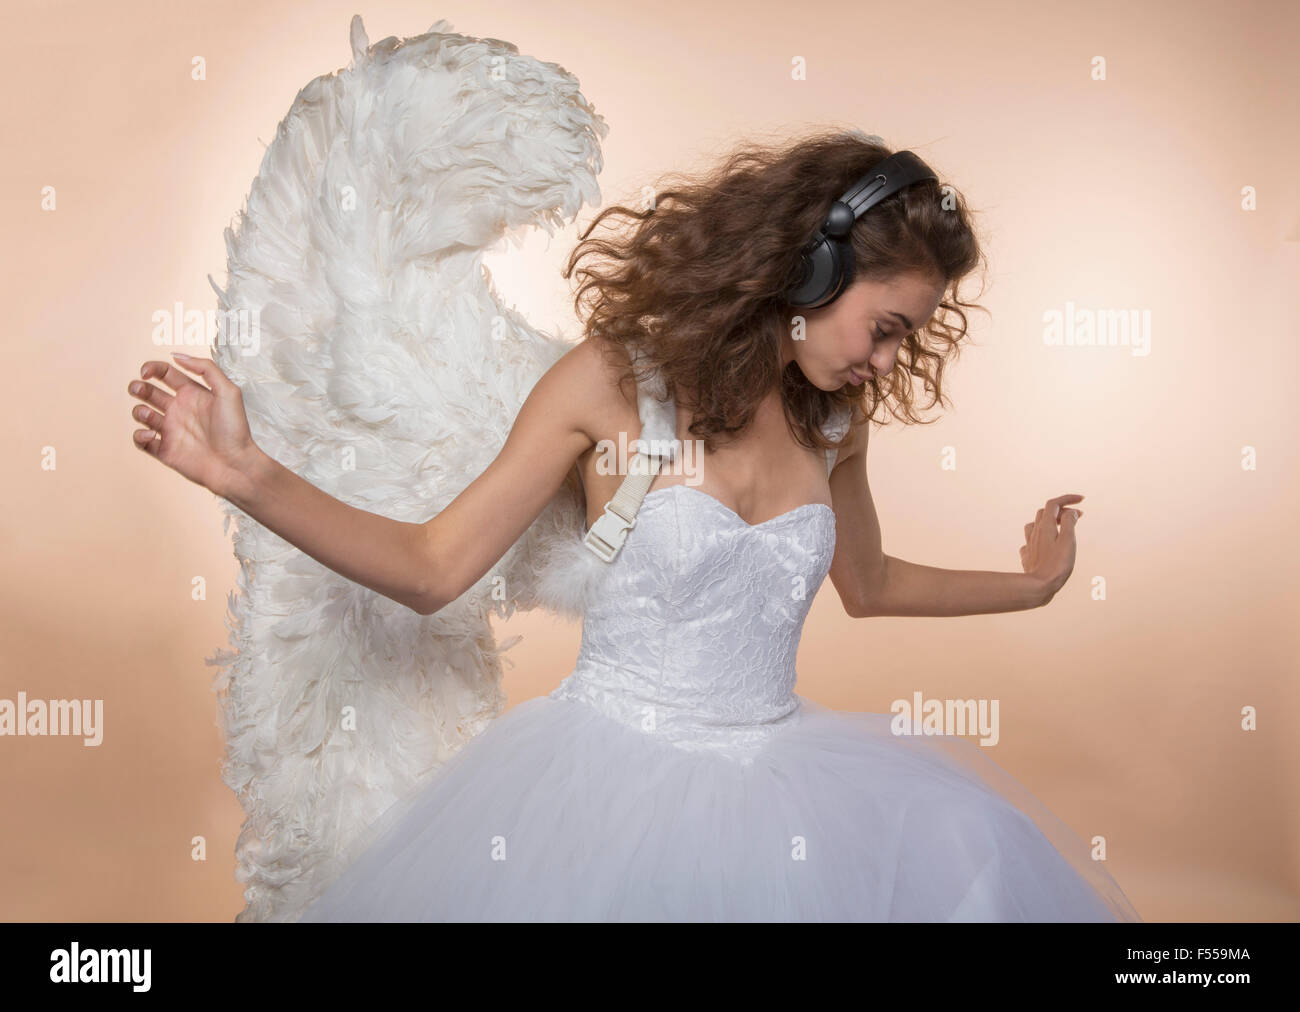 Bride in angel wings dancing while listening music against colored background Stock Photo